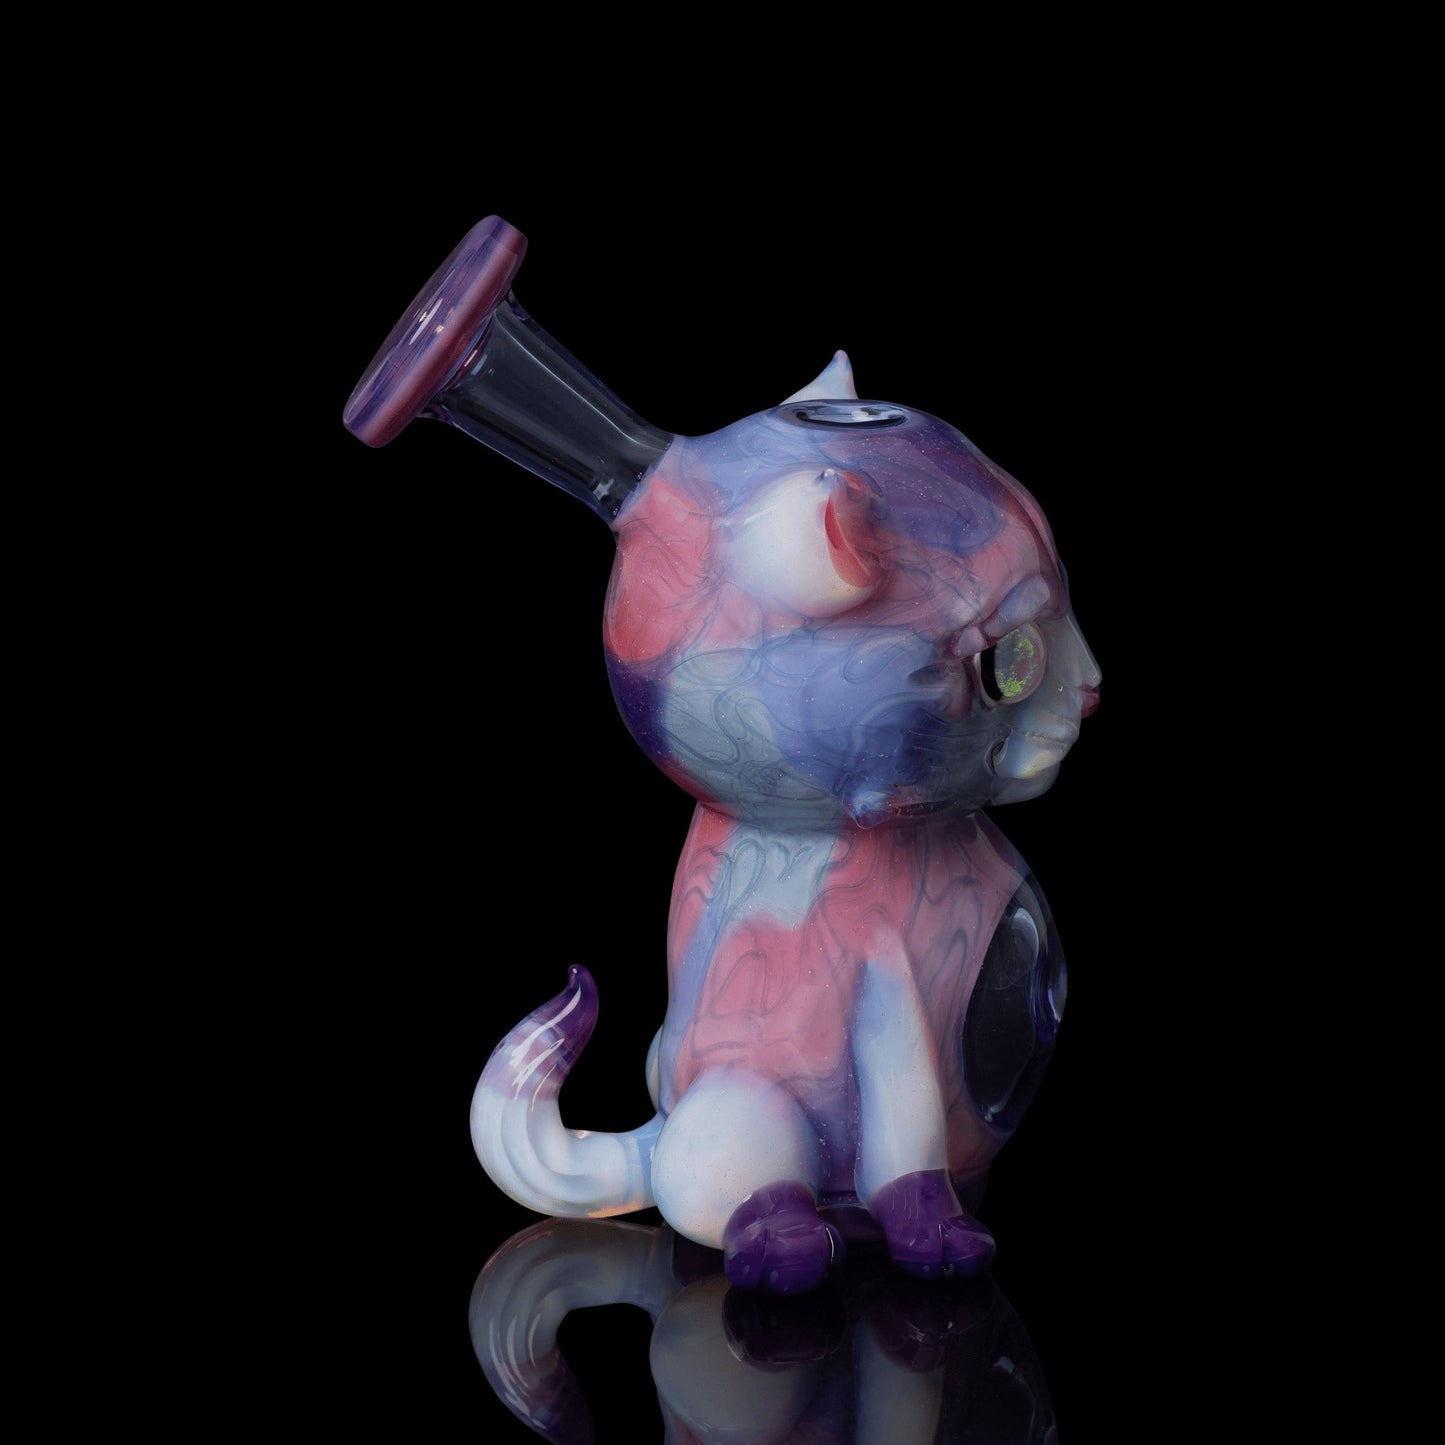 heady design of the Collab Kitty Rig by Nathan Belmont x Scomo Moanet (Scribble Season 2022)